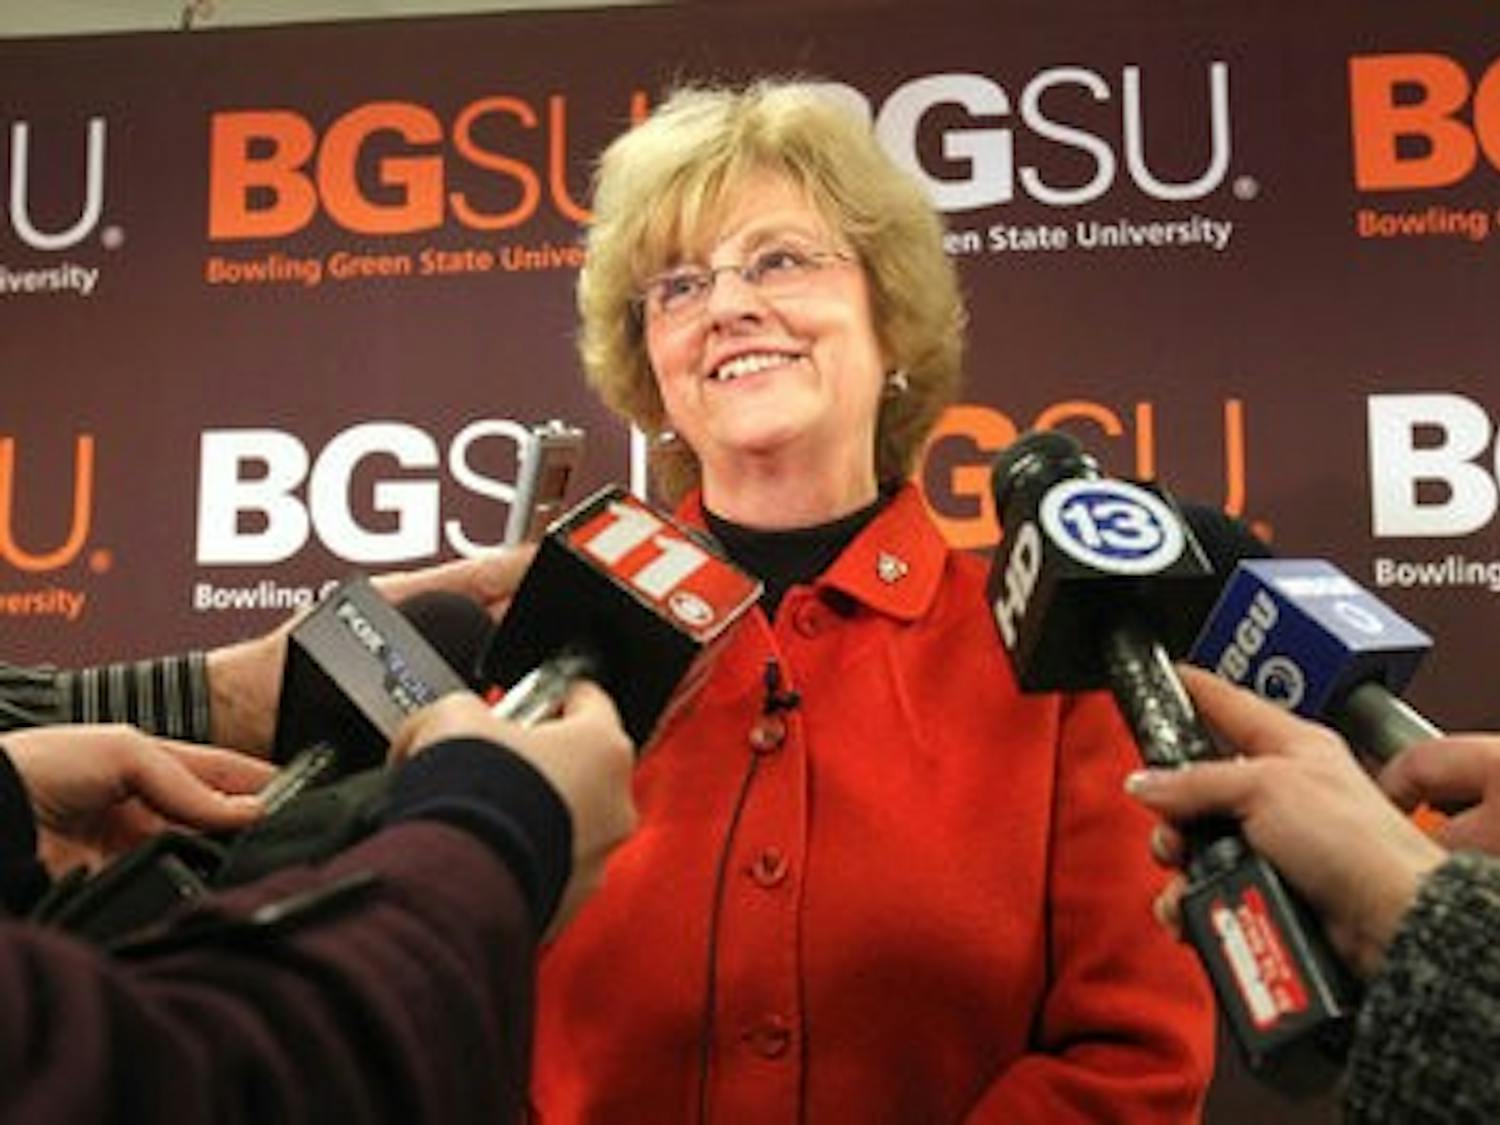 Mary Ellen Mazey speaks at Bowling Green State University after being named the next president. (Craig Bell / Photography Director BGSU)